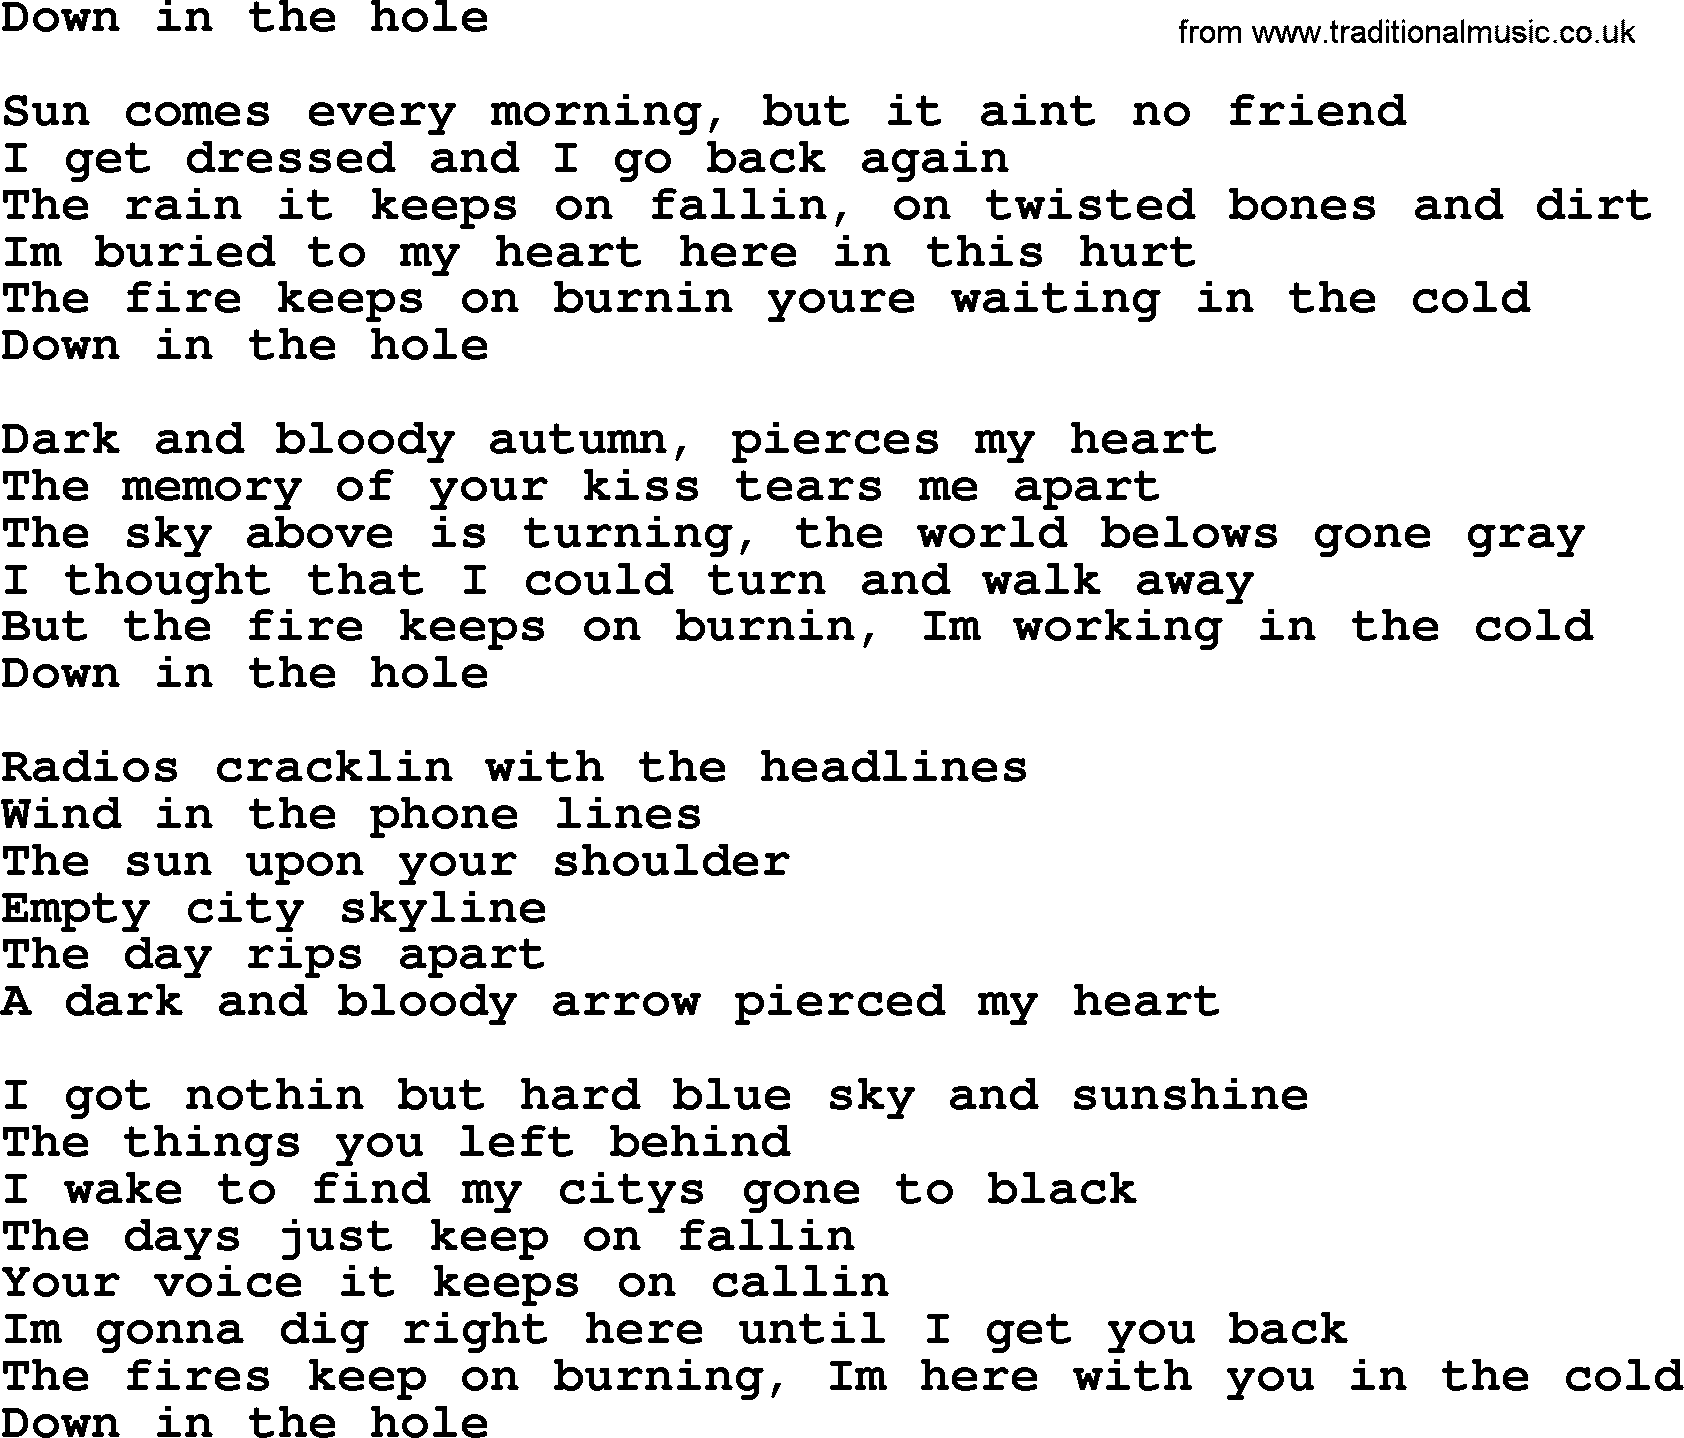 Bruce Springsteen song: Down In The Hole lyrics